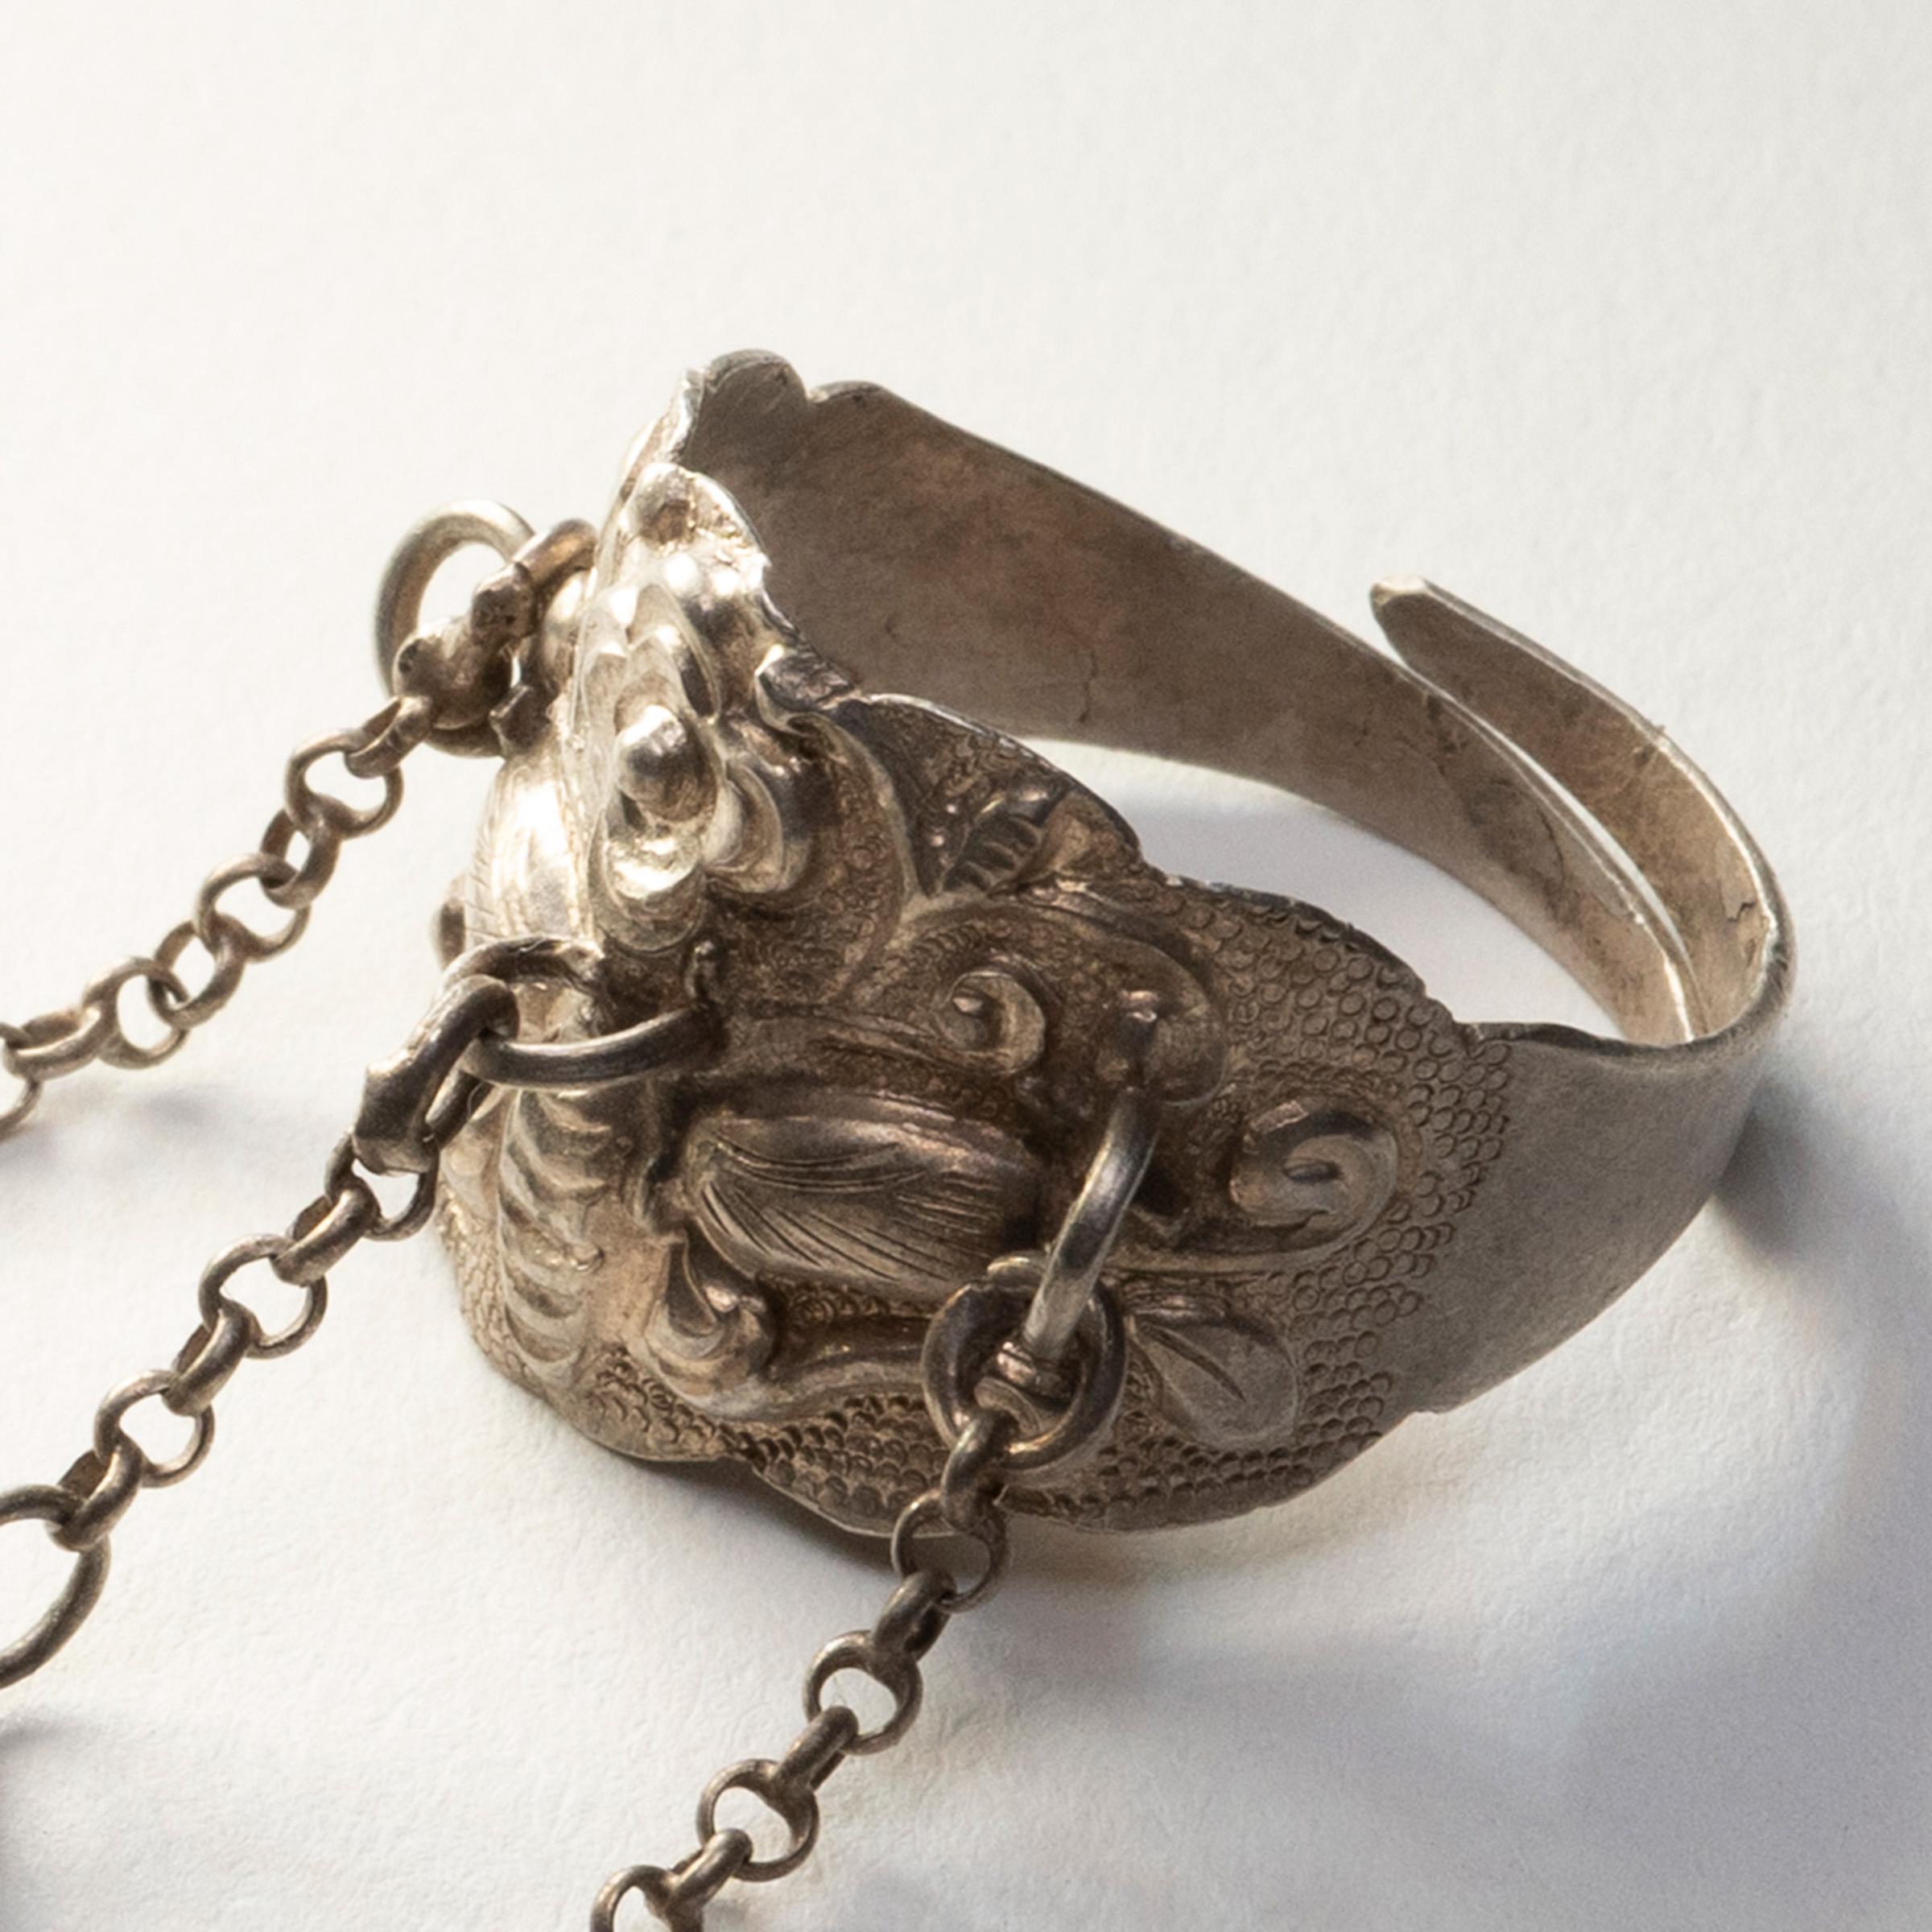 Dated to the late 19th century, this silver-plated charm ring was believed to protect the wearer from bad luck and malevolent spirits. The ring is decorated with a relief design of a cicada surrounded by flowers and curling tendrils. Cicadas have